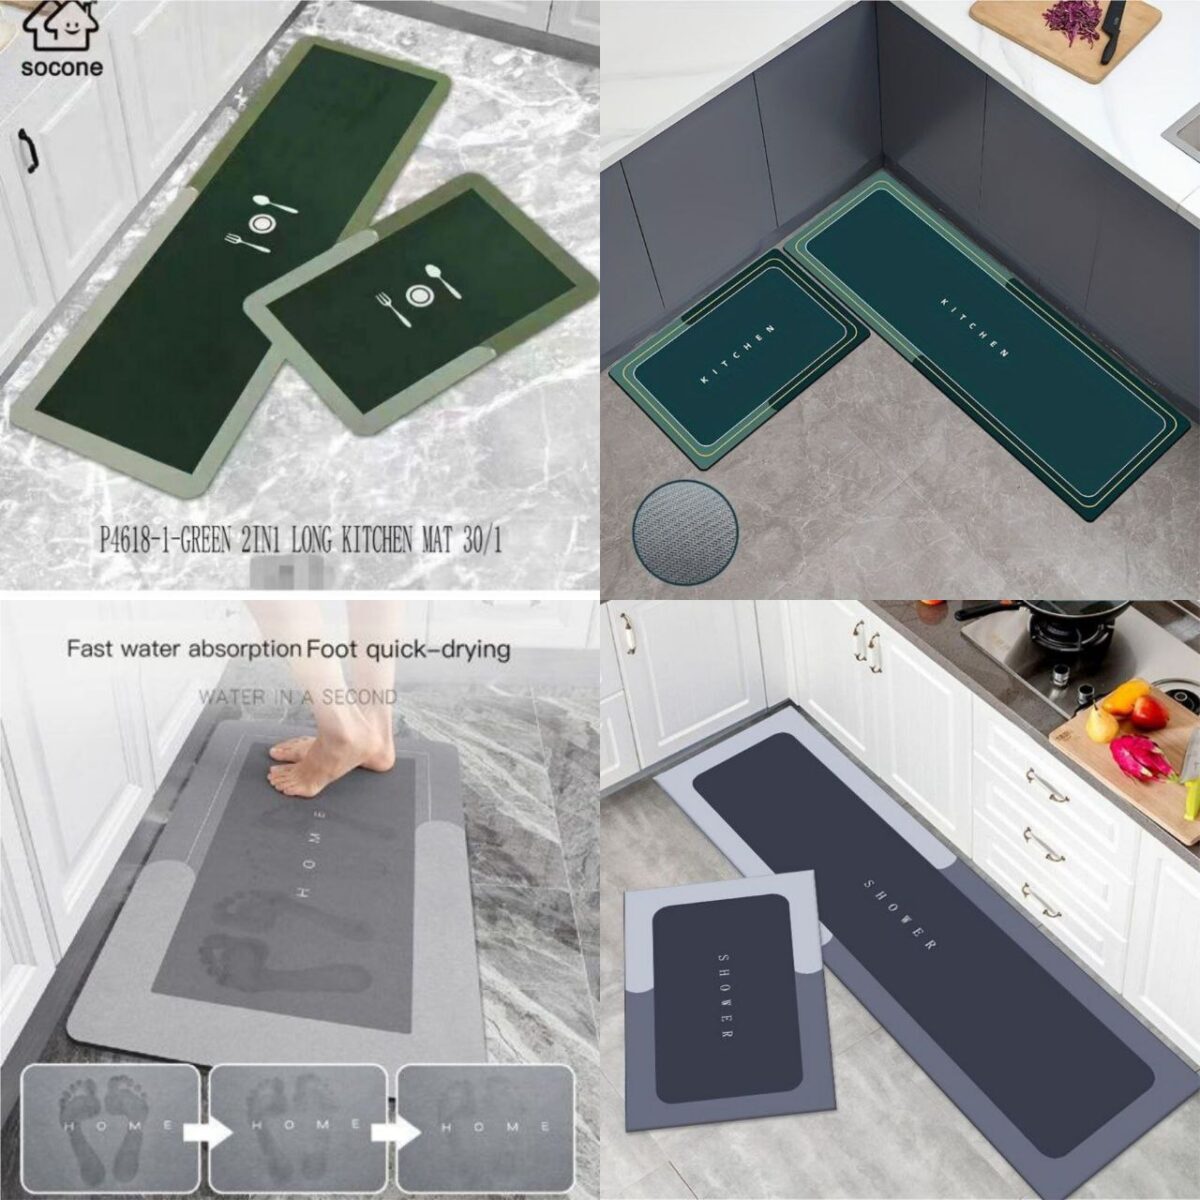 An "anti-slip silicon washboard mat" is a durable mat made of silicone with a textured surface to prevent slipping. It's designed for laundry purposes, providing a stable and non-slip platform for handwashing and scrubbing clothes, making the washing process more effective and convenient.